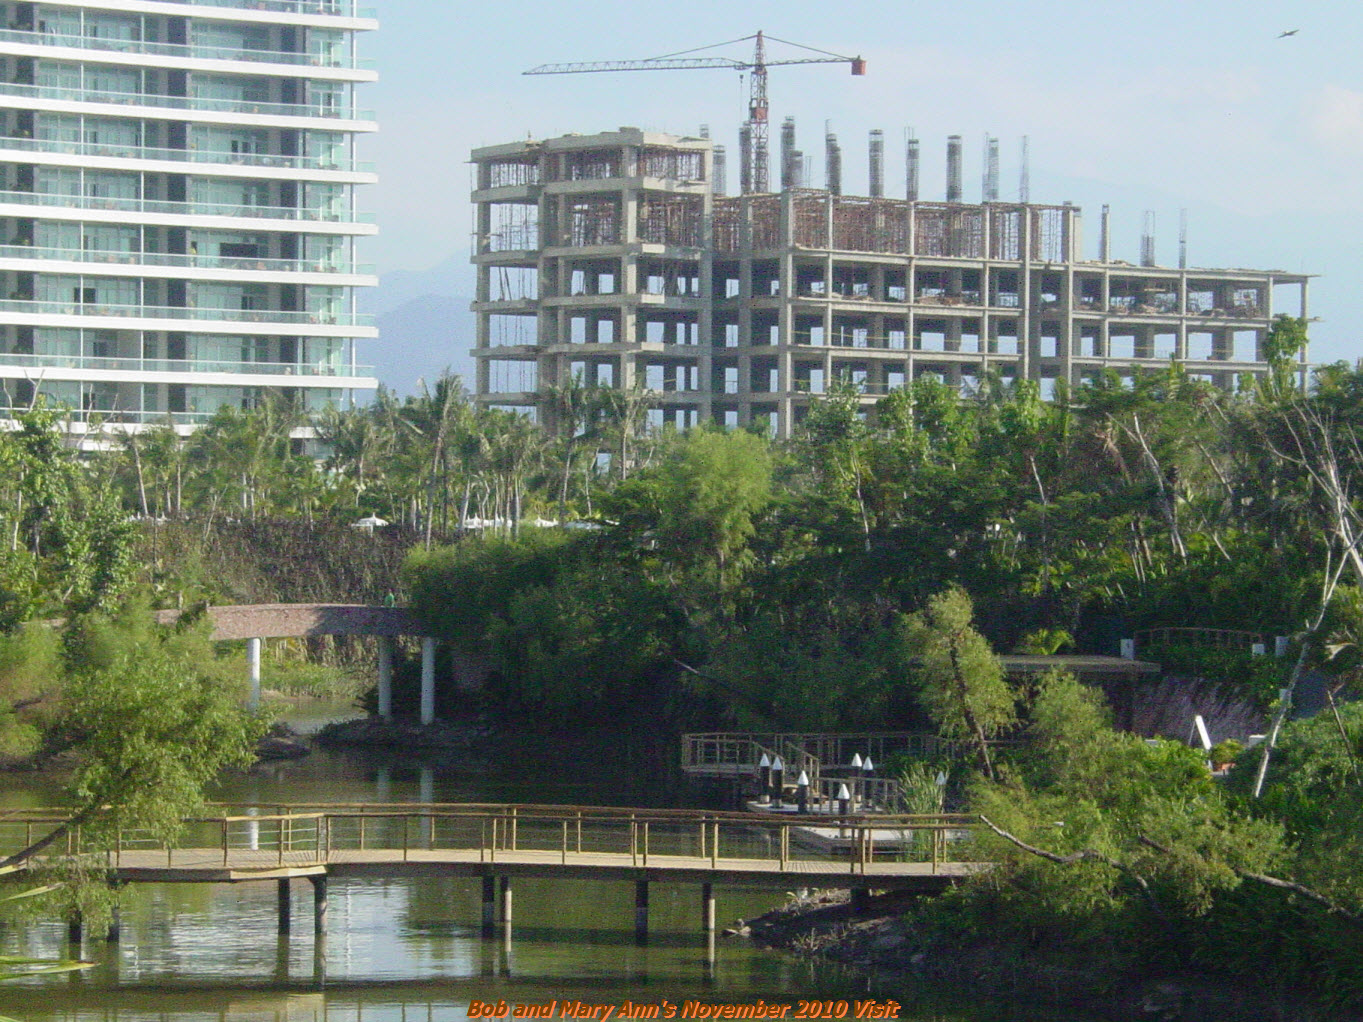 The Grand Luxxe Punta is under construction.  It will likely not be opened until late 2011.  Staying at the Grand Luxxe Punta will be worth the wait.